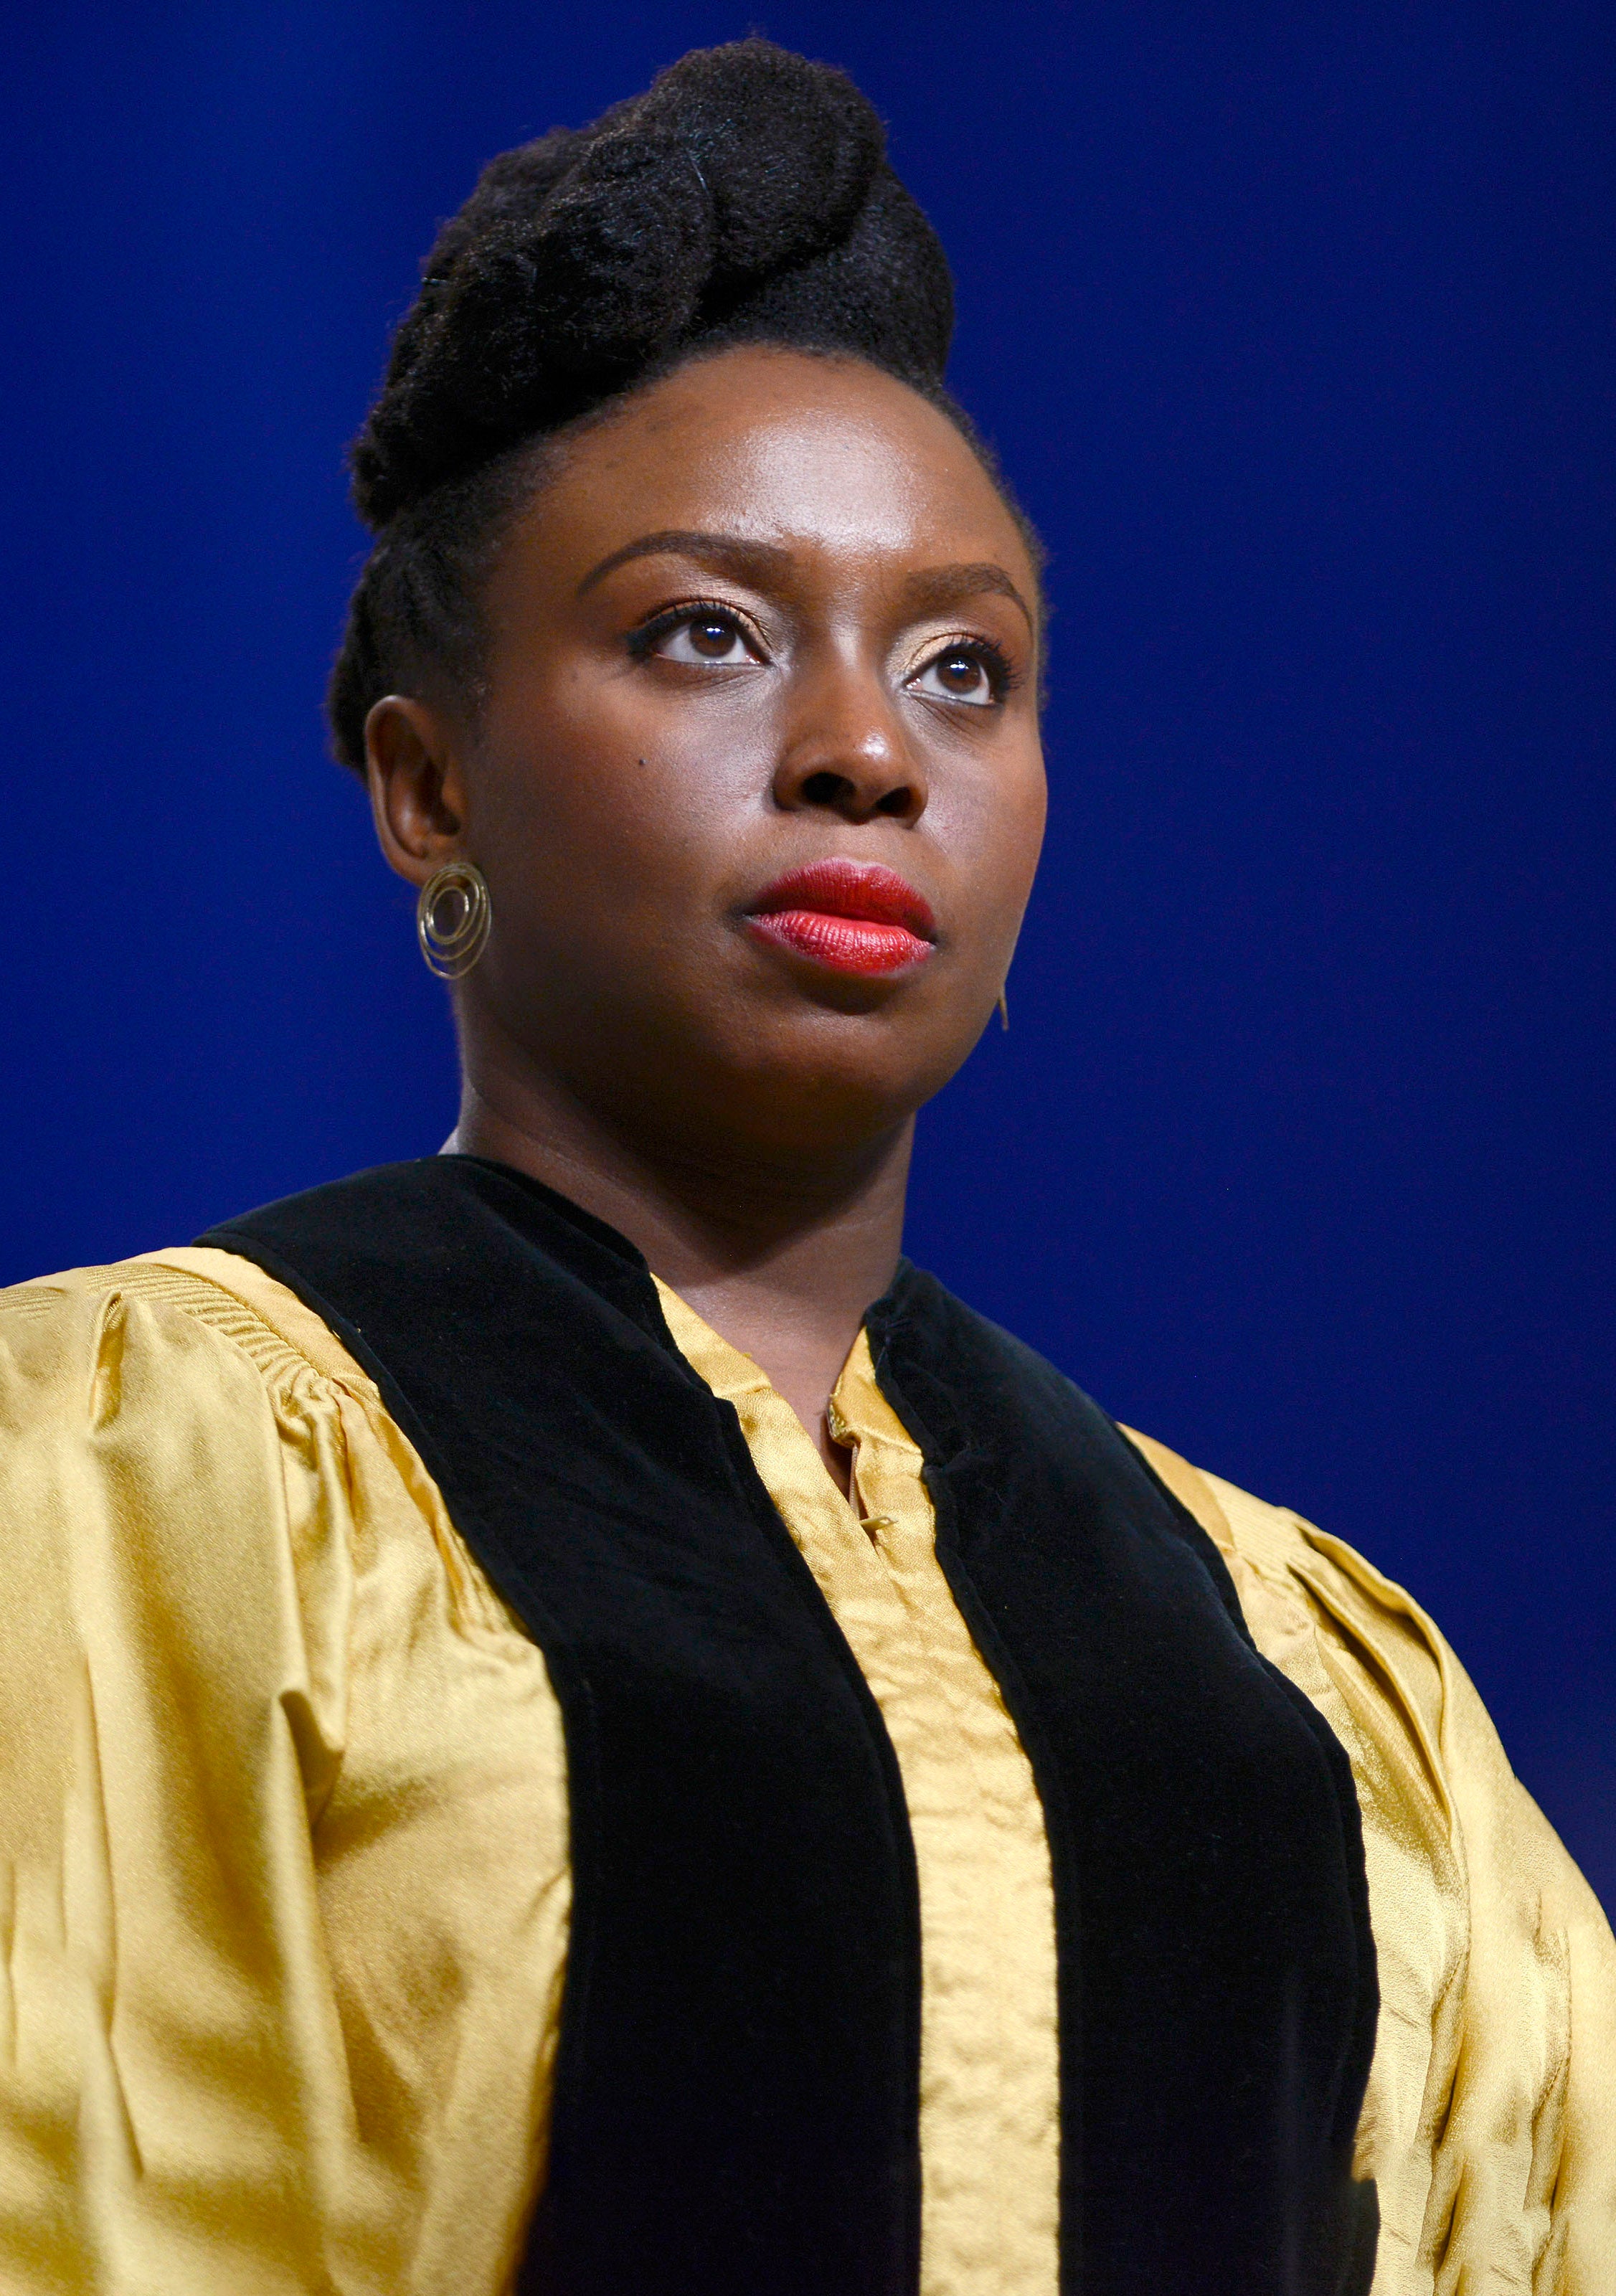 Chimamanda Ngozi Encourages Women To Embrace Authenticity Over Likeability In New Book
